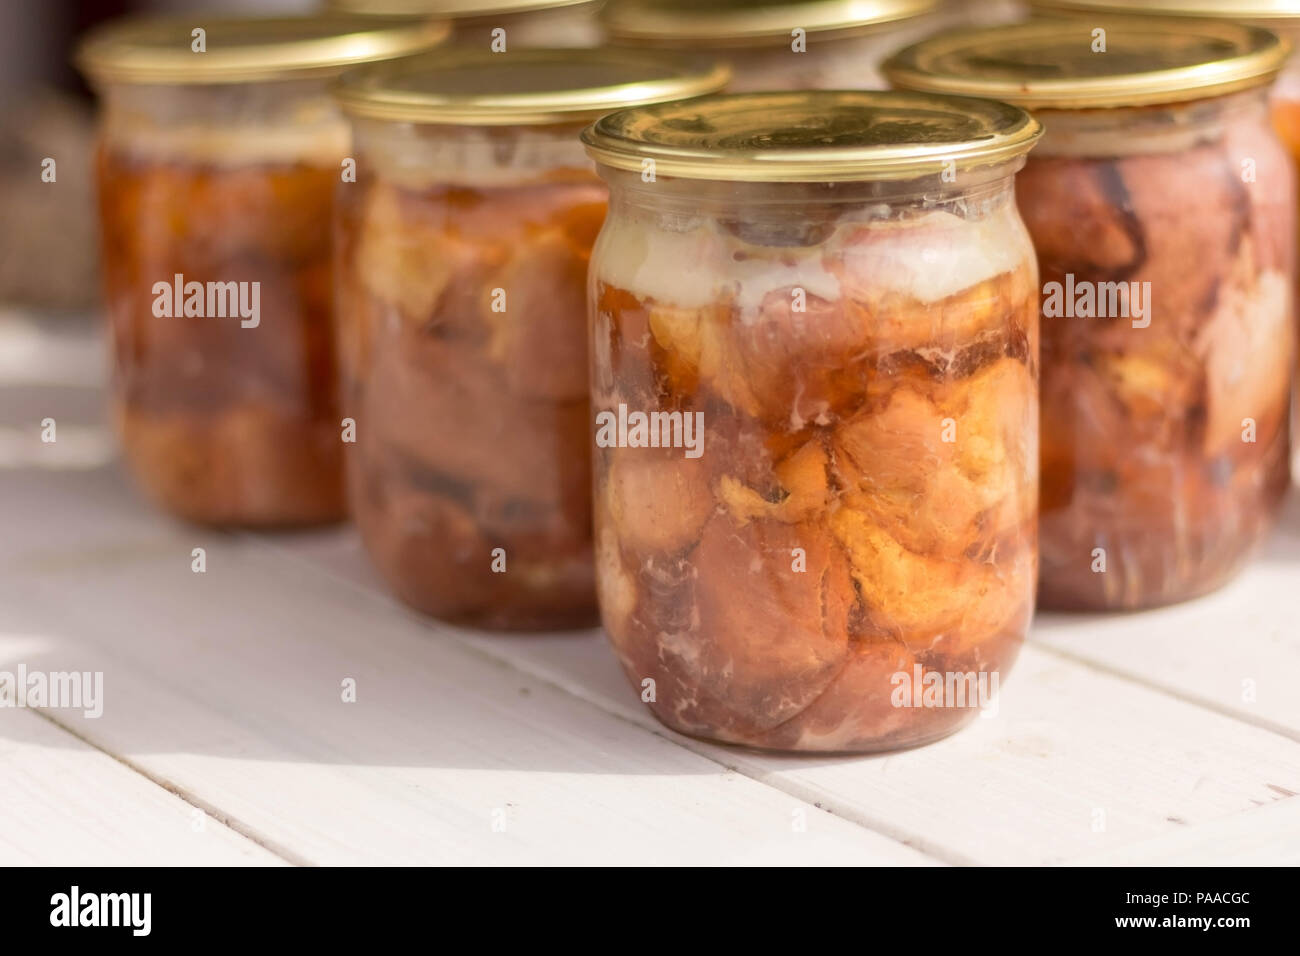 Canned meat in a glass jar on a white wooden table Stock Photo